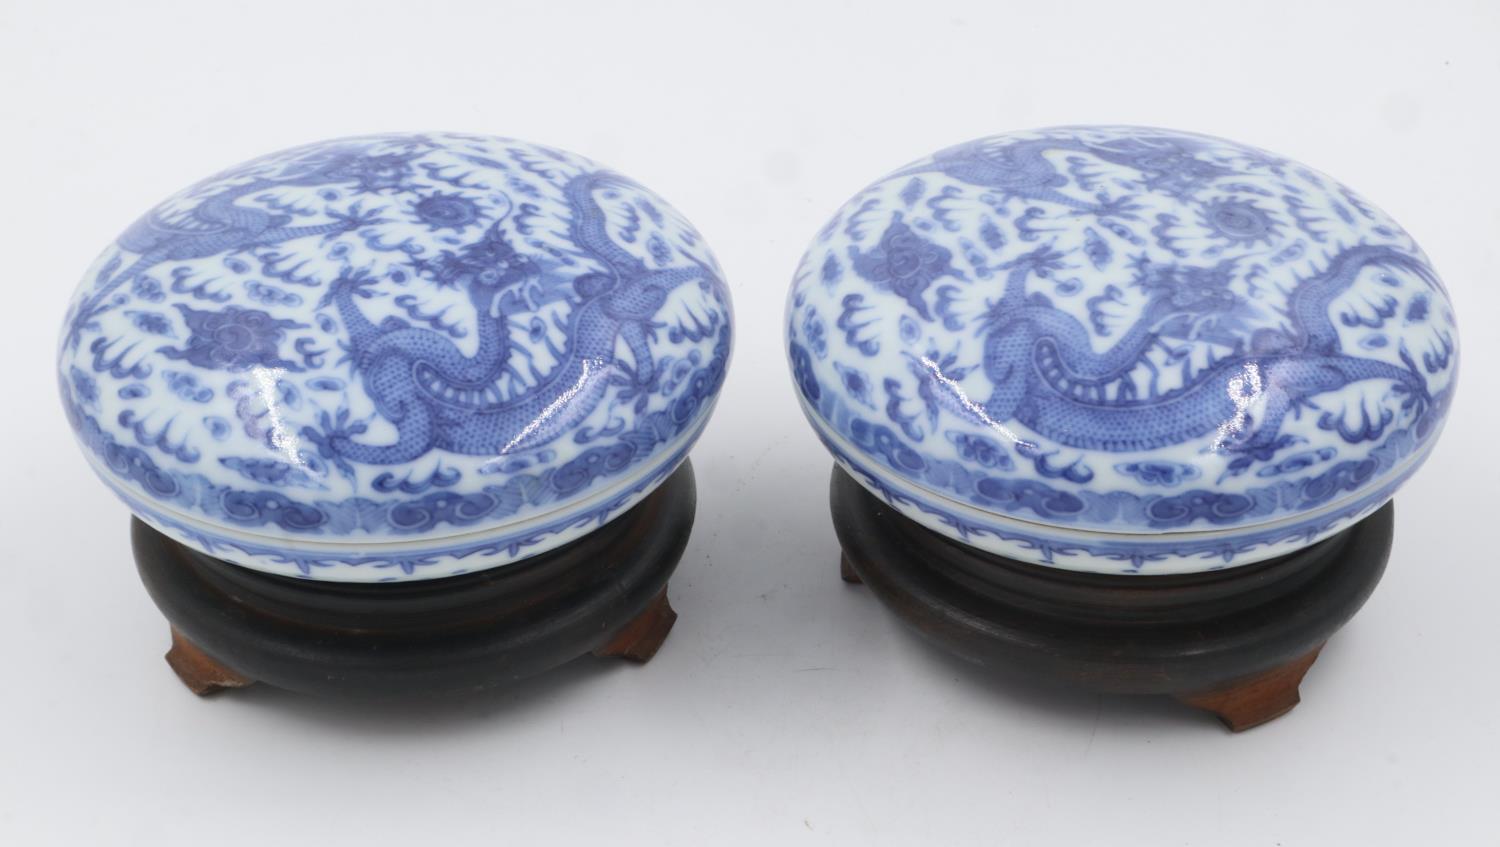 Pair of Chinese blue and white covered bowls with dragon decoration, each raised on a wooden